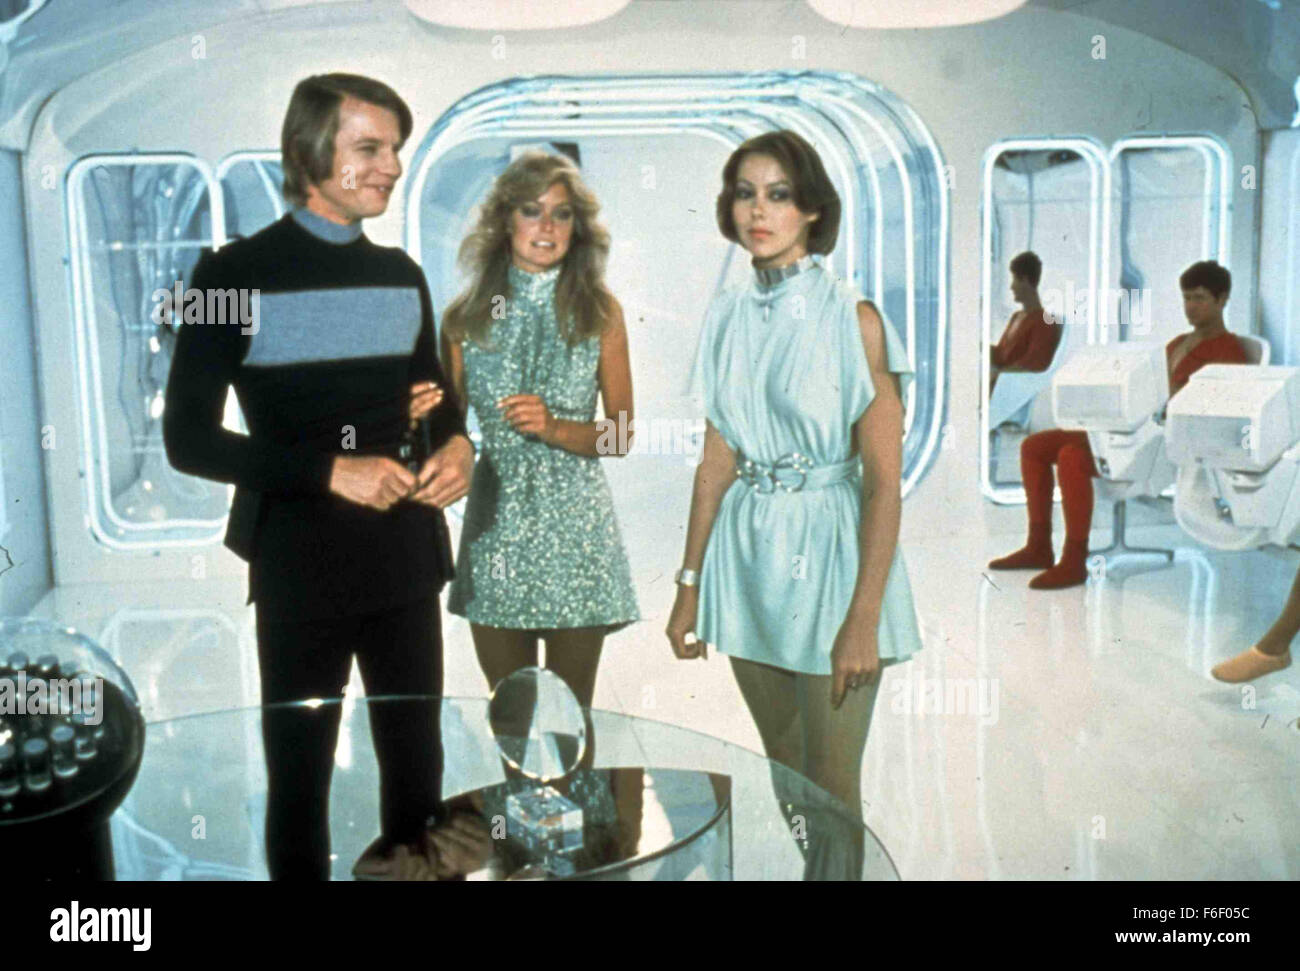 1976 - Logan's Run. Movie Set RELEASE DATE: June 23, 1976. MOVIE TITLE: . STUDIO: Logan's Run. PLOT: An idyllic sci-fi future has one major drawback: life must end at 30.. PICTURED: Michael York as Logan, Farrah Fawcett as Holly (as Farrah Fawcett-Majors) and Jenny Agutter as Jessica 6. June 25, 2009 FARRAH FAWCETT died this morning at 9:28 a.m. at the St. John's Health Center in Los Angeles after a courageous and lengthy battle with cancer. She was 62. Stock Photo